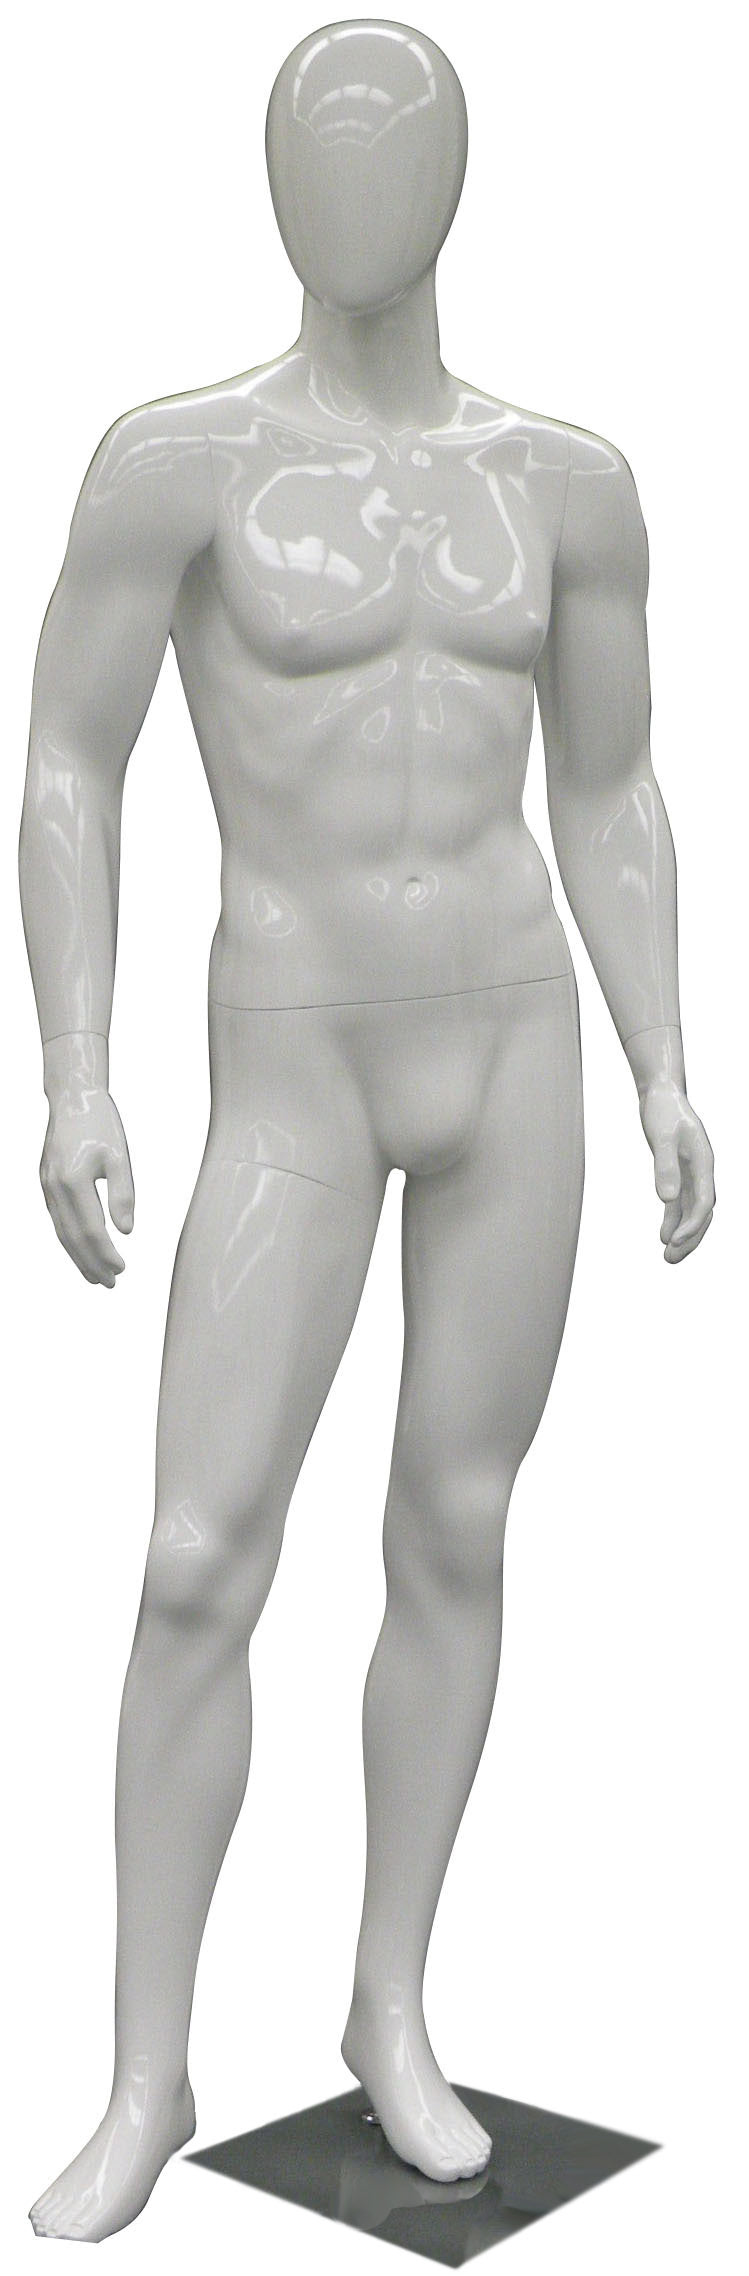 Lyle 3: Egghead Male Mannequin in Glossy White